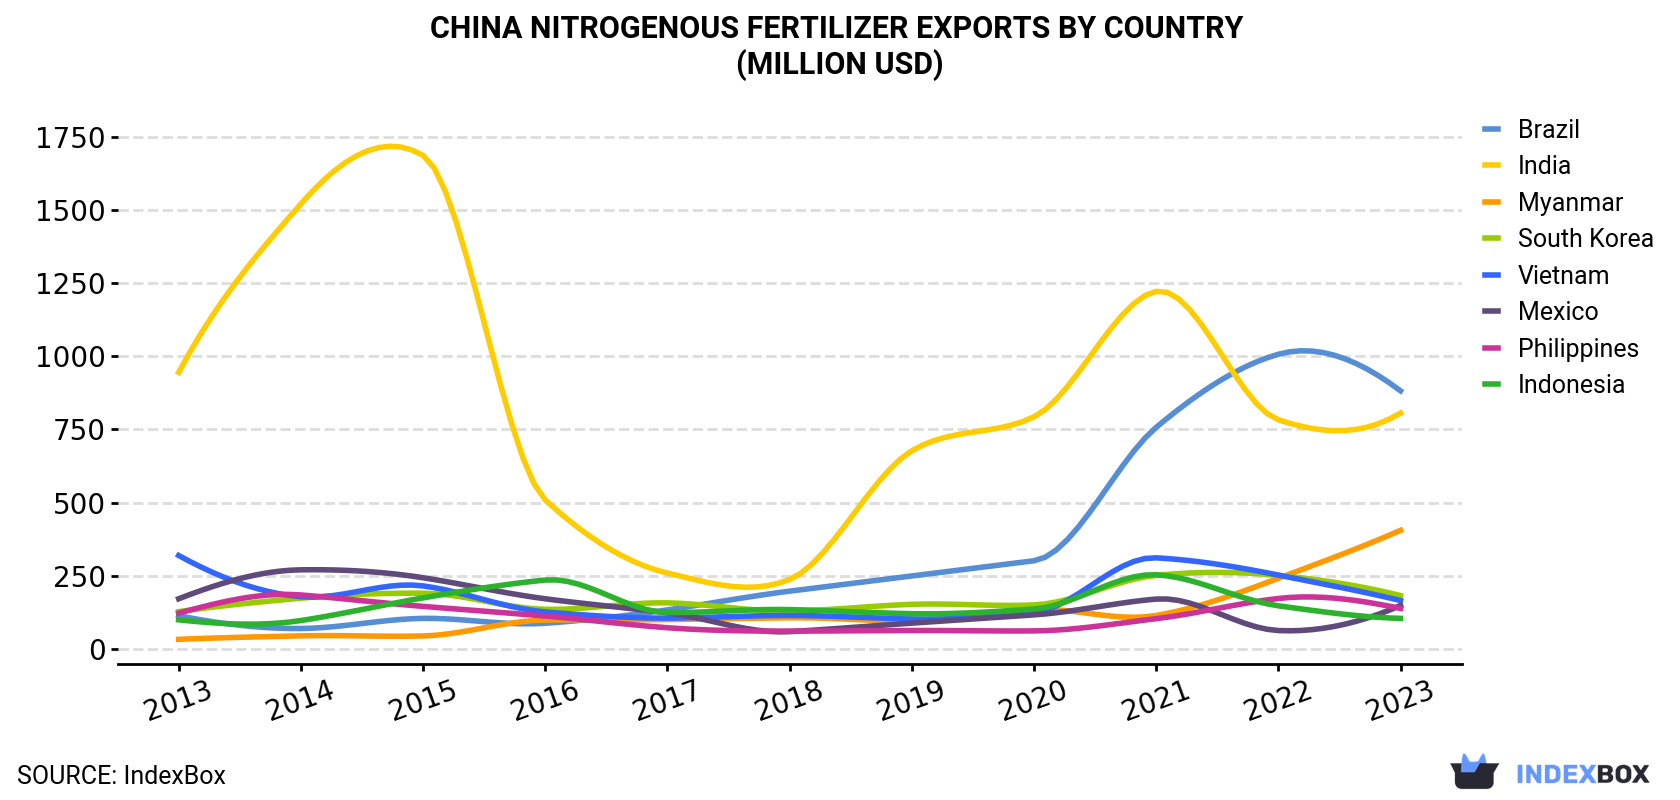 China Nitrogenous Fertilizer Exports By Country (Million USD)